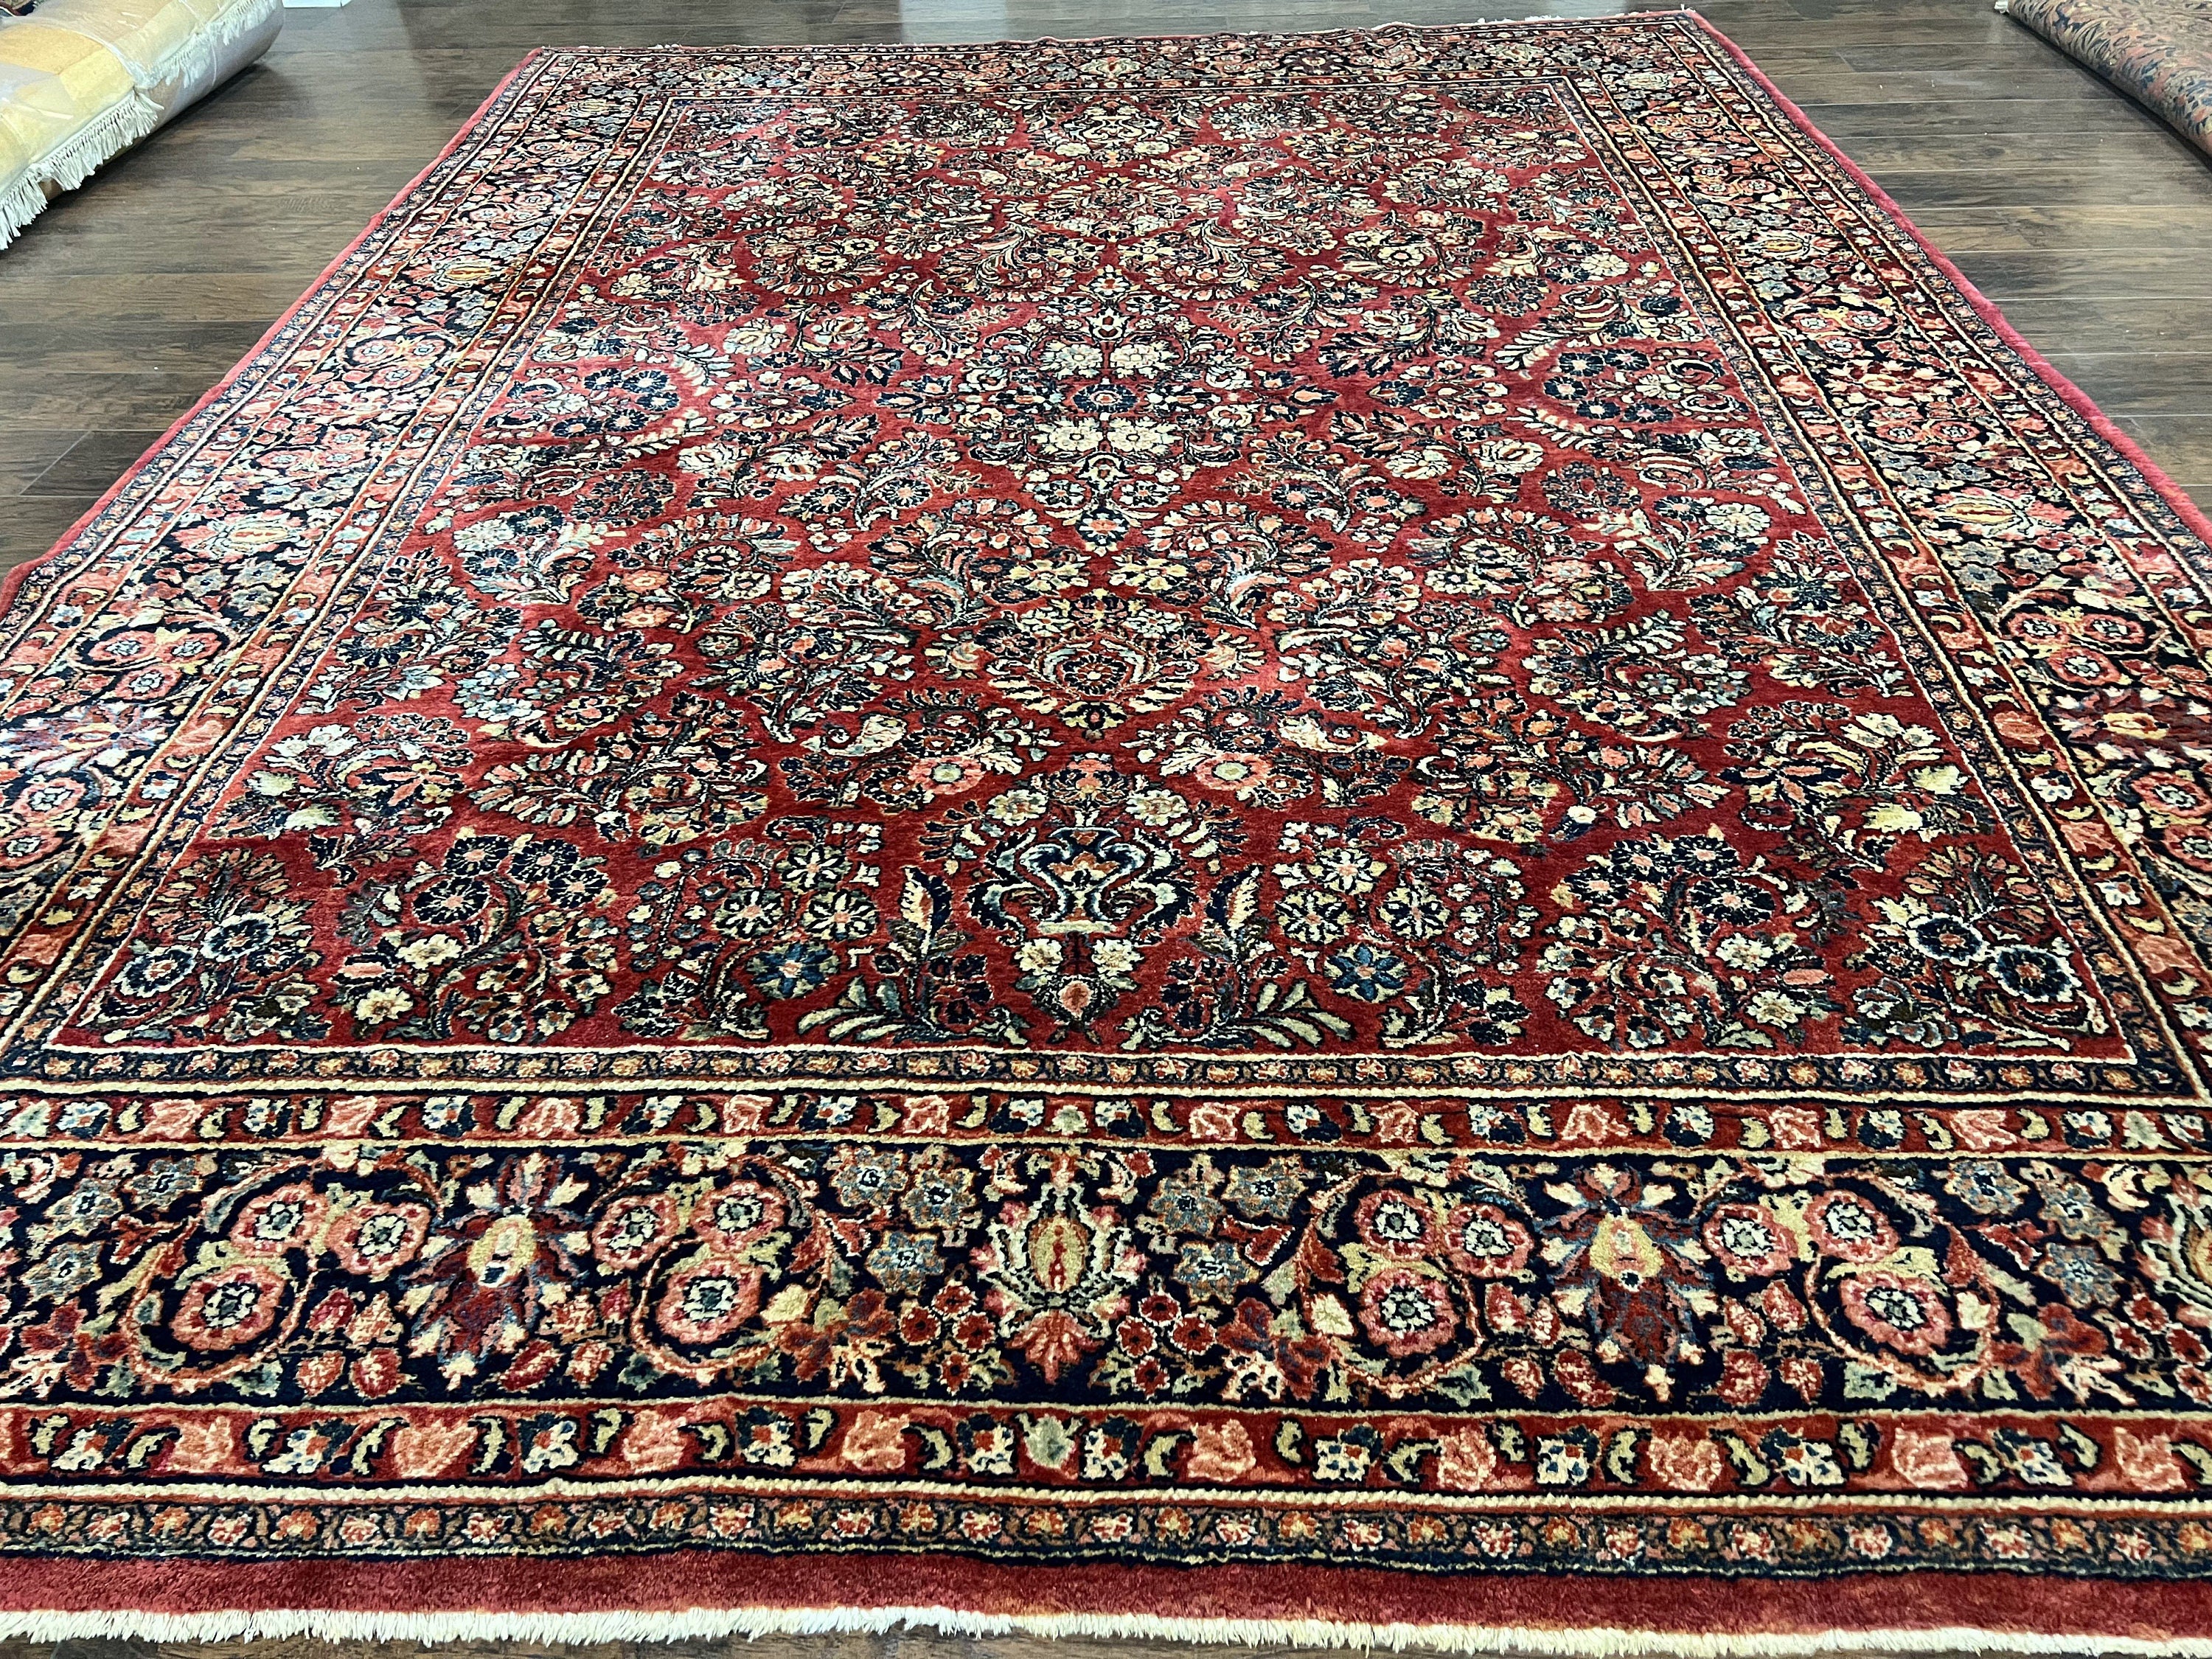 1920s Persian Rug 9x12, Red Persian Carpet, High Quality Persian Rug,  Allover Floral Pattern, Antique Oriental Rug, Wool Handmade Room Sized 